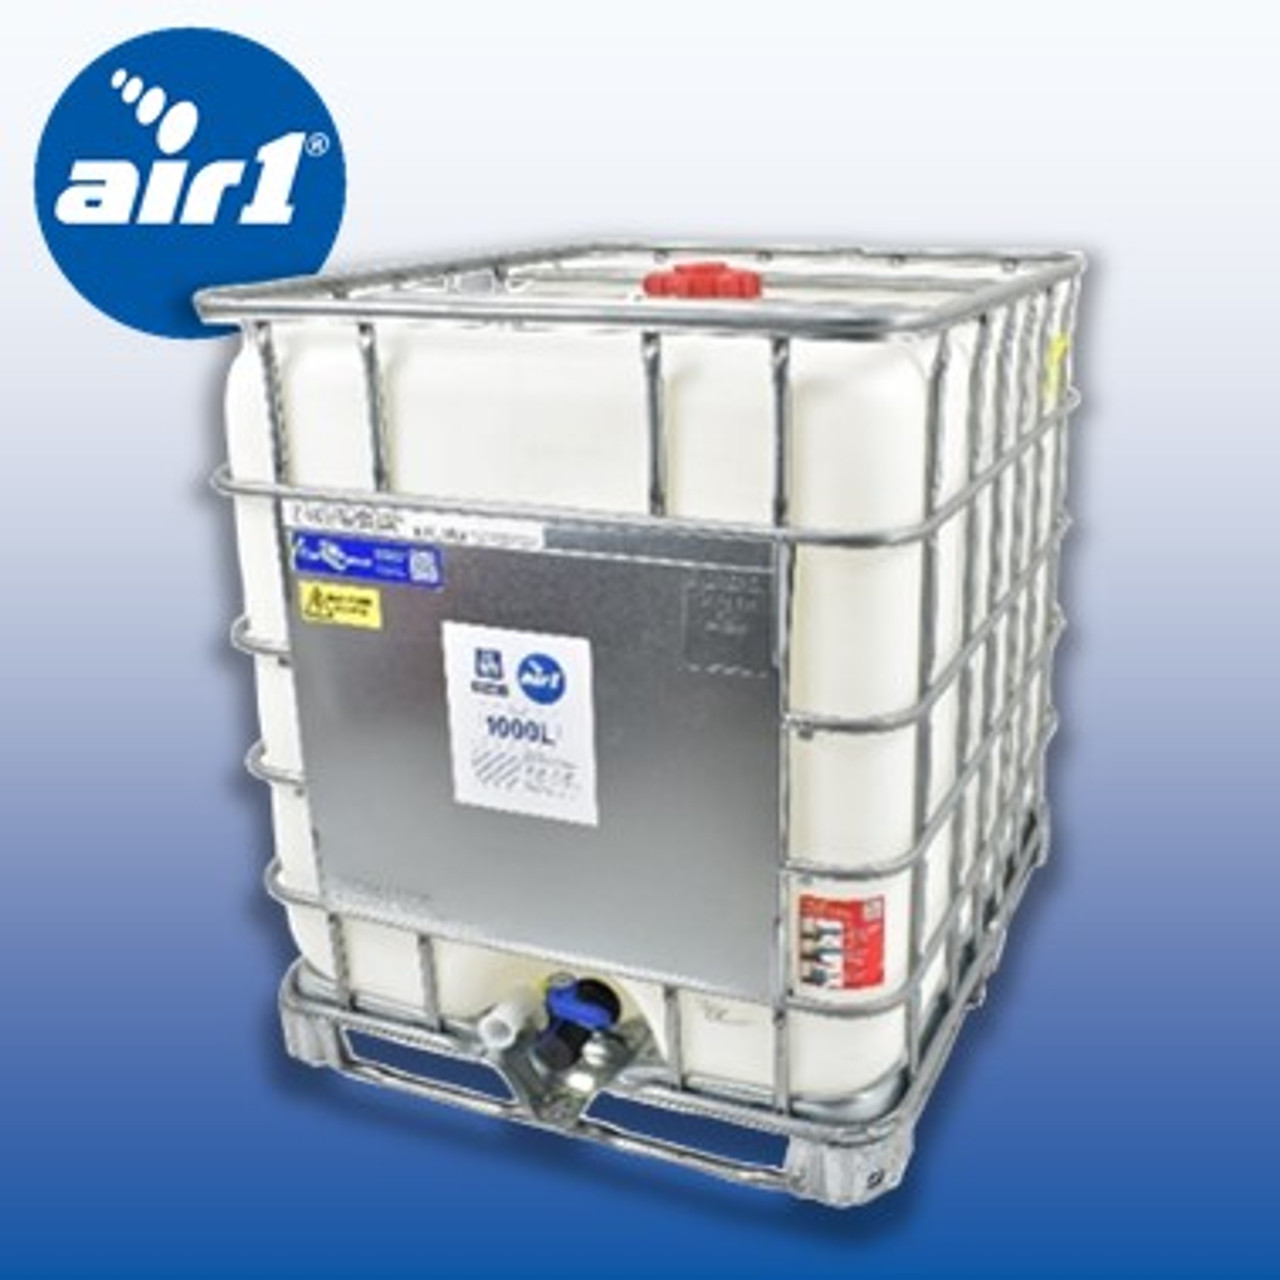 AdBlue 1000 litre IBC (including surcharge & free delivery)